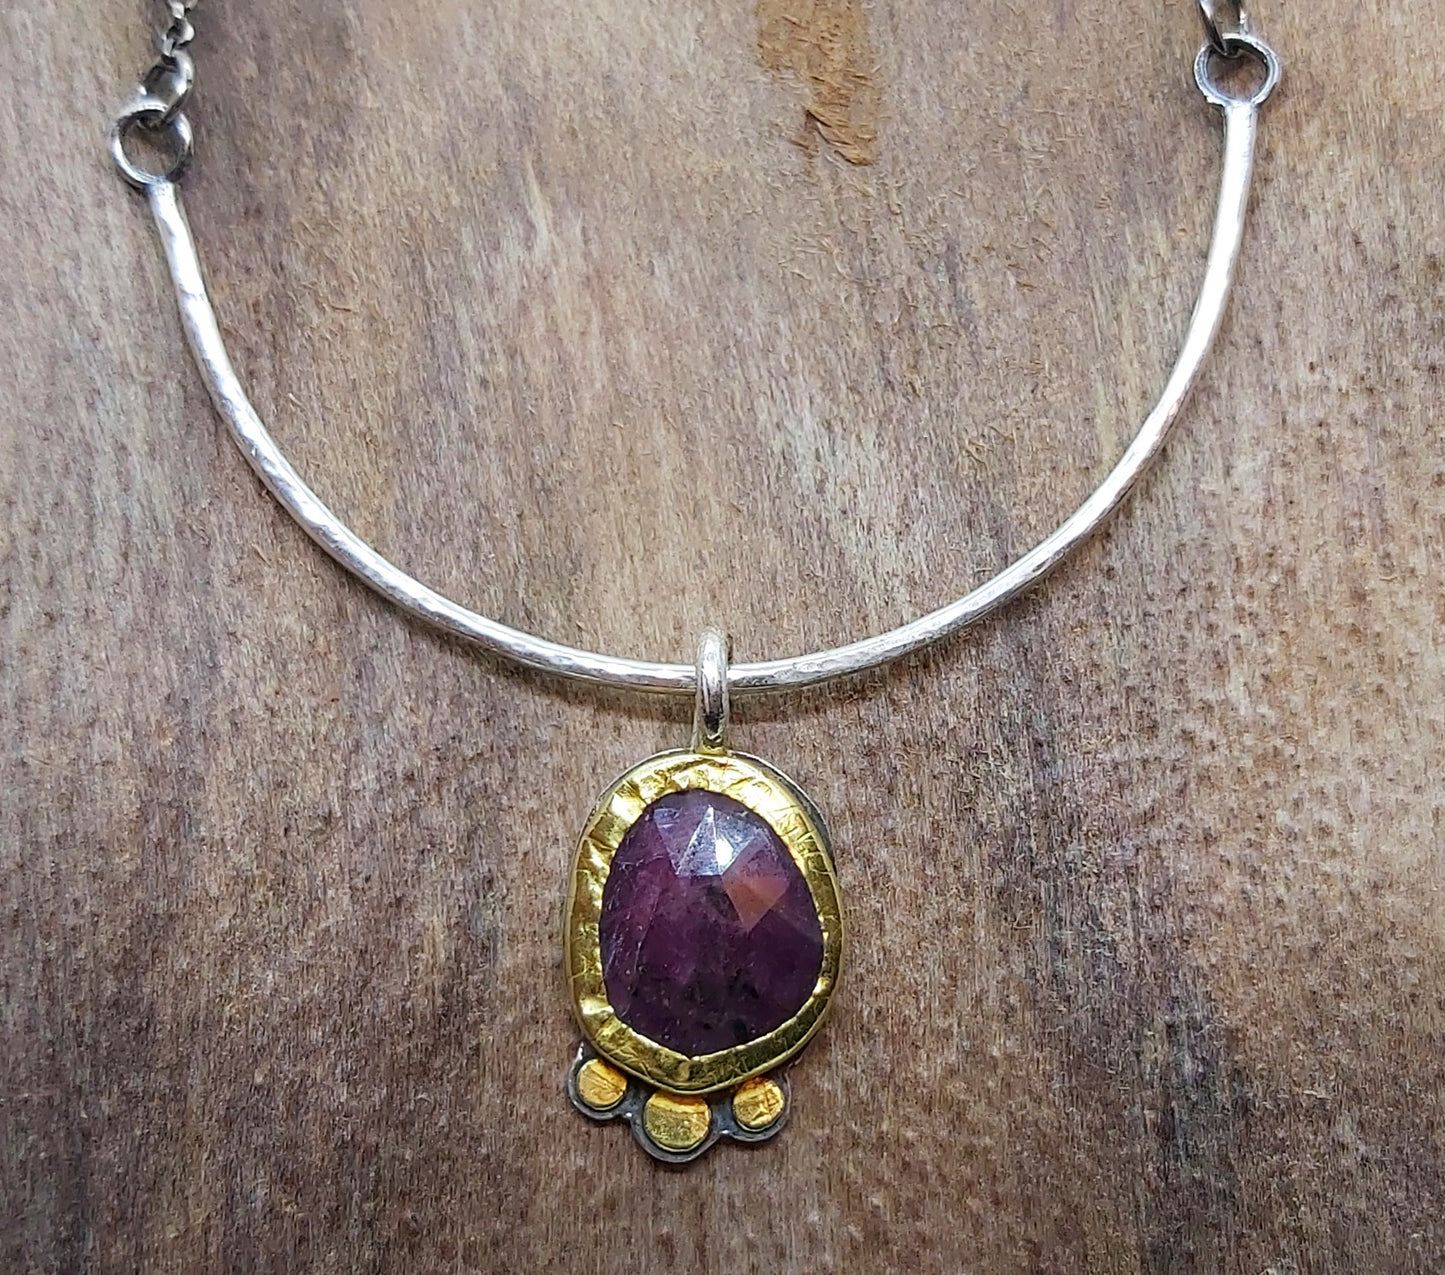 Sapphire pendant in 22k bezel and silver